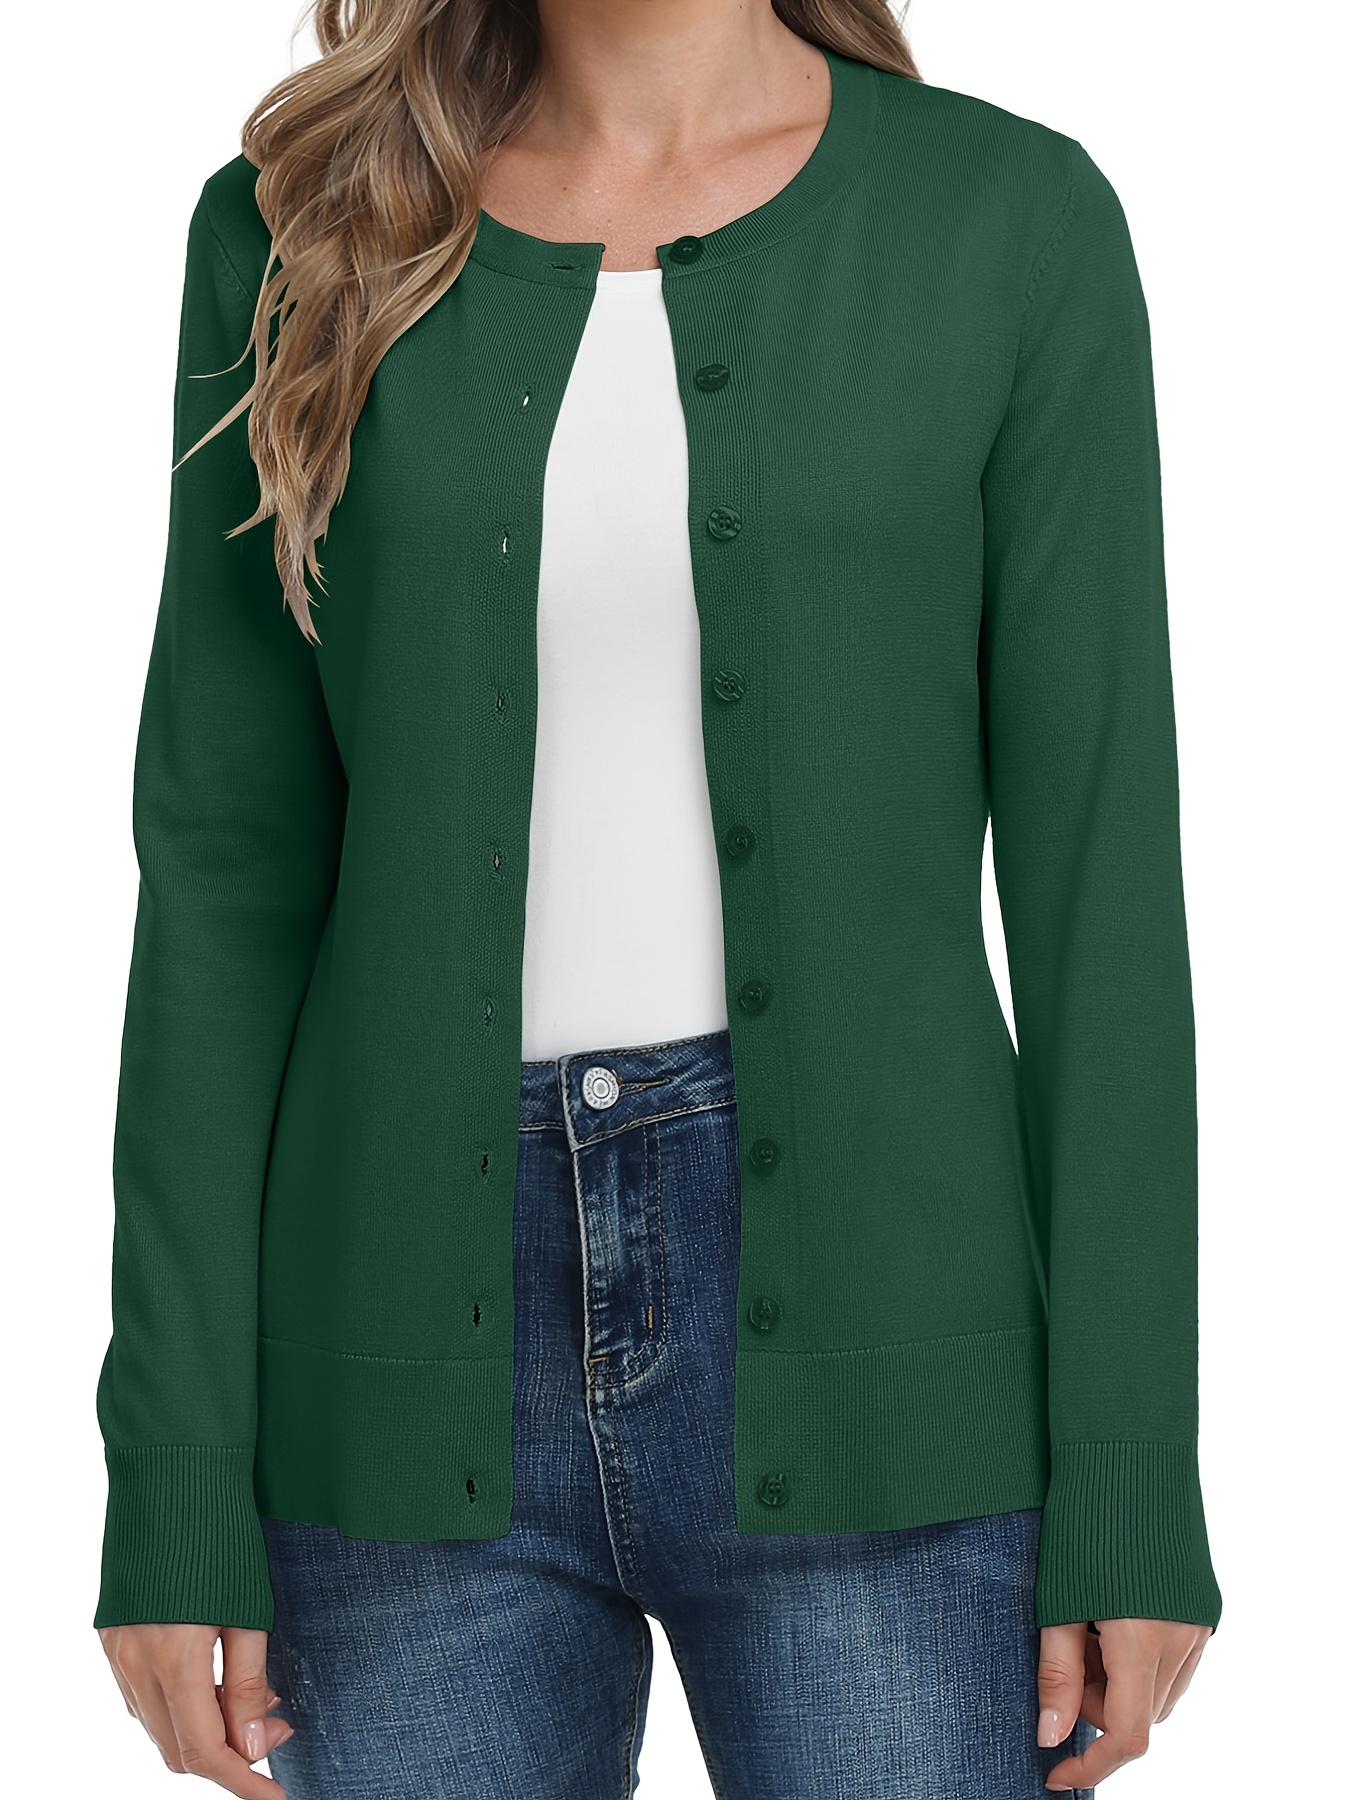 Canrulo Womens Shirt Long Sleeve Blouse Open Front Cropped Cardigan Buttons  Down Lapel Neck Shirts Top Green M 